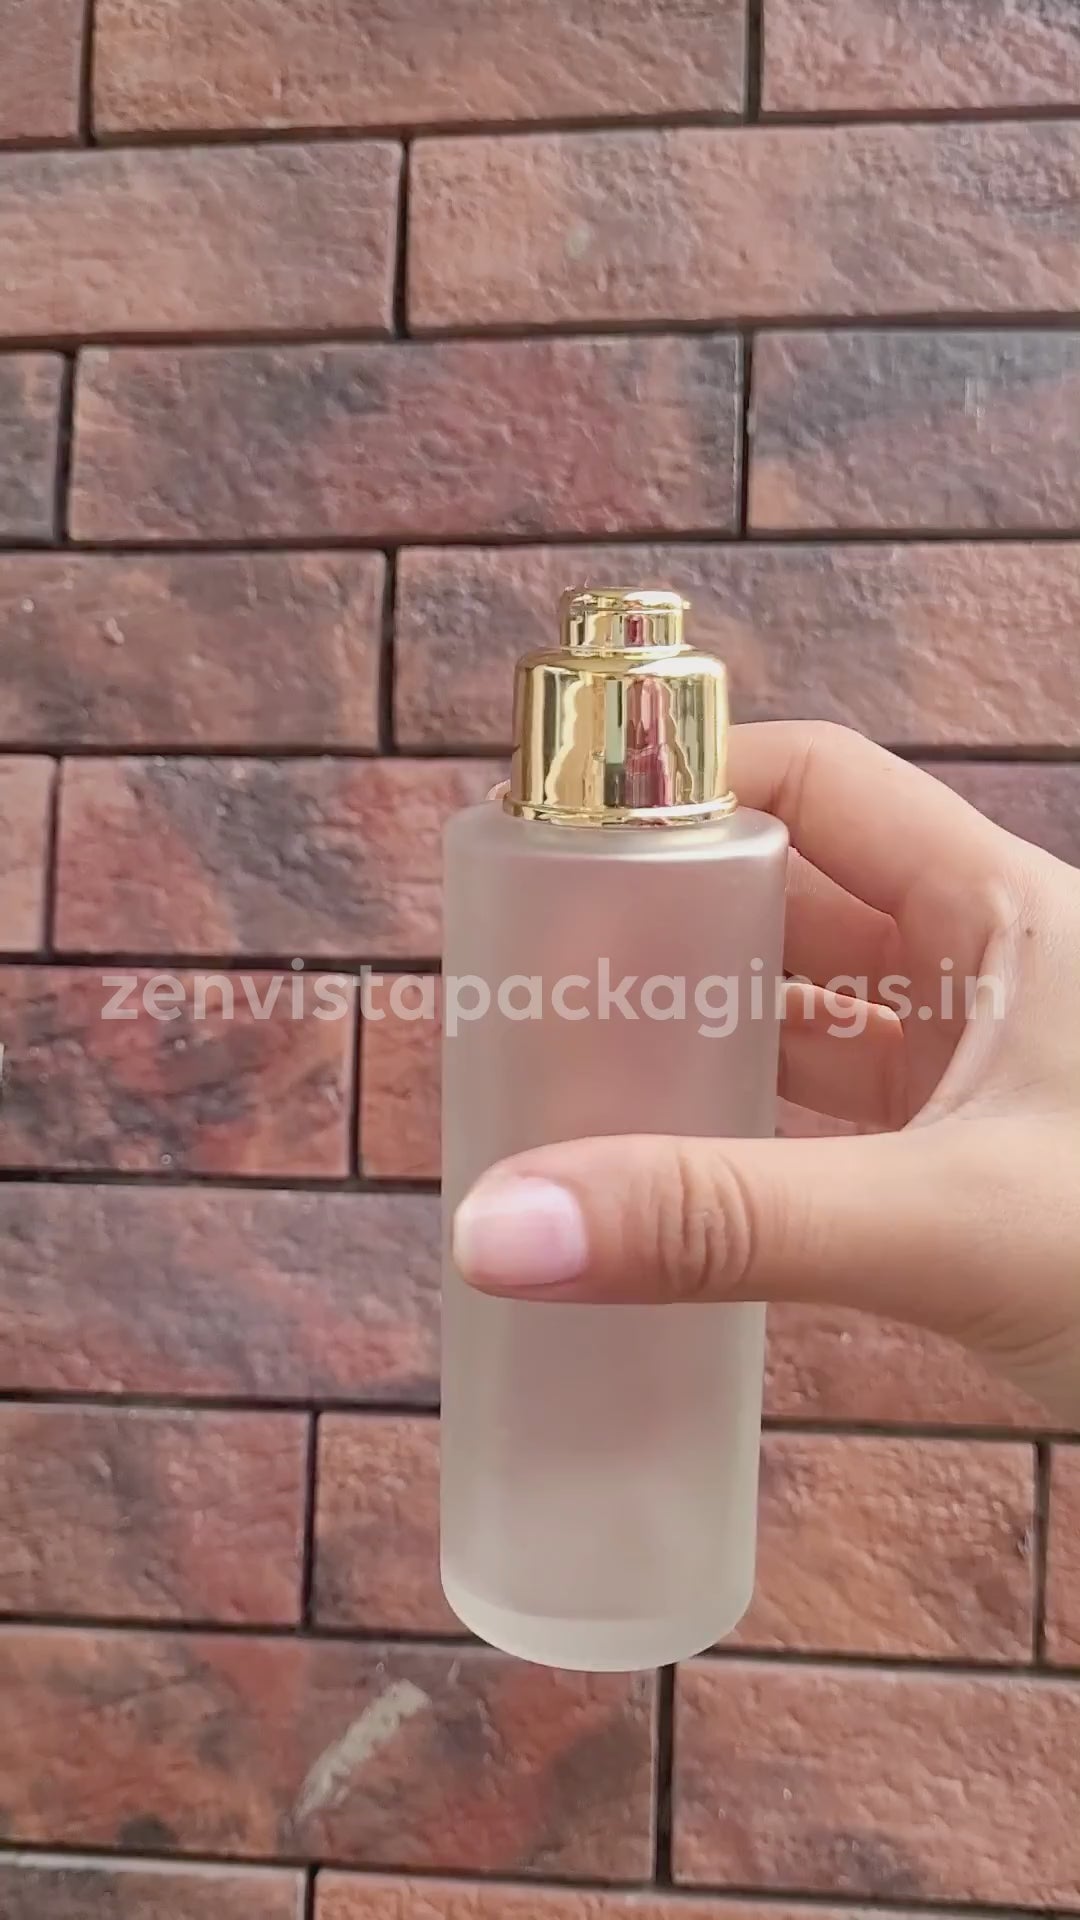 |ZMG43|  FLAT SOLDER FROSTED GLASS BOTTLE WITH GOLD PLATED LOCKET CAP Available Size: 25ml, 30ml, 50ml, 100ml